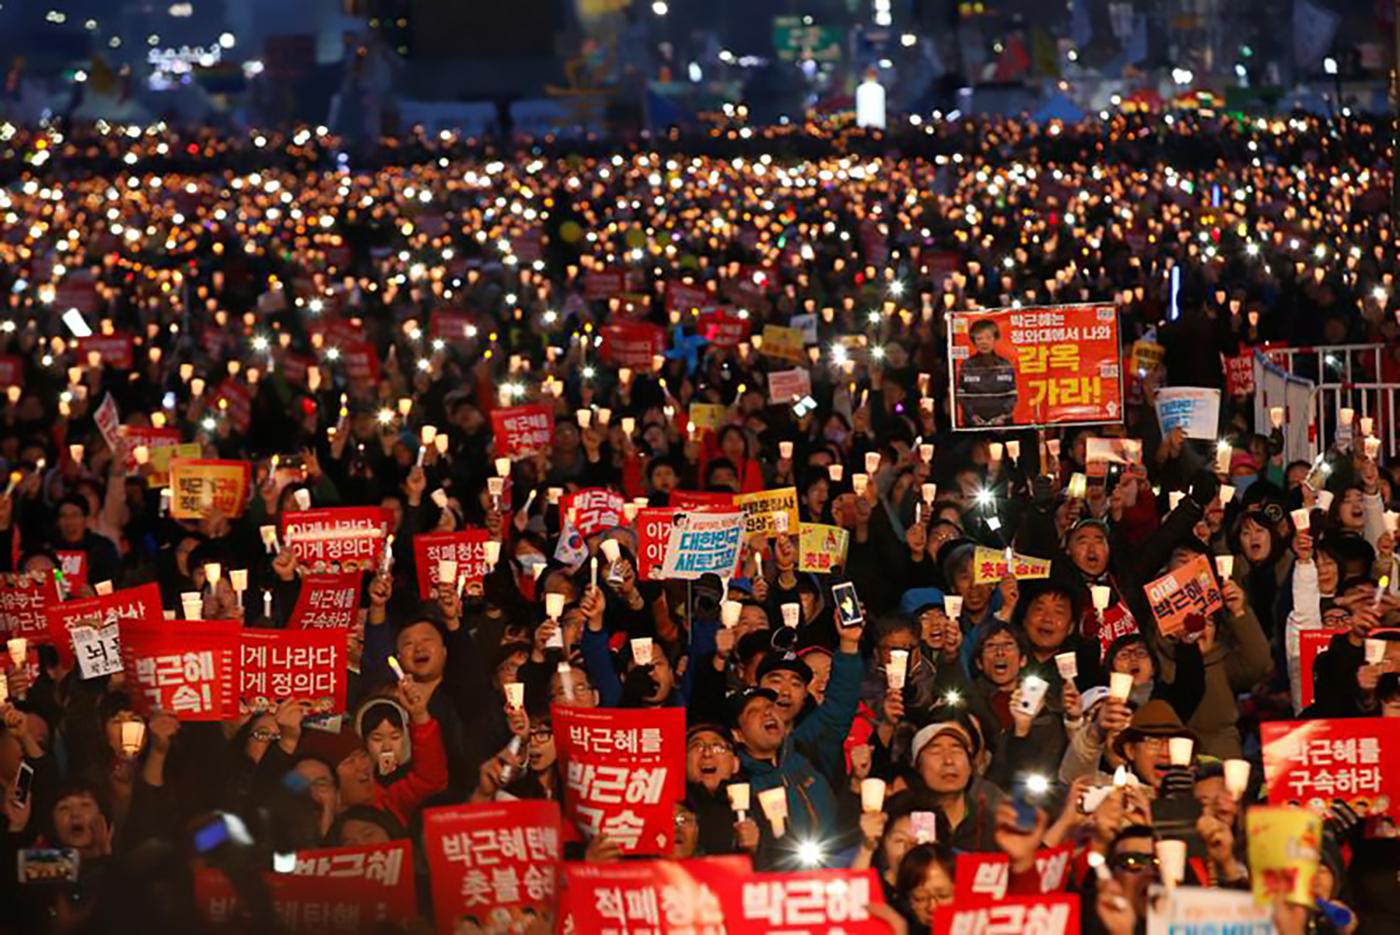 Protesters hold candles as they celebrate the impeachment of South Korea's ousted leader Park Geun-hye at a rally in Seoul, South Korea, March 11, 2017. REUTERS/Kim Kyung-Hoon